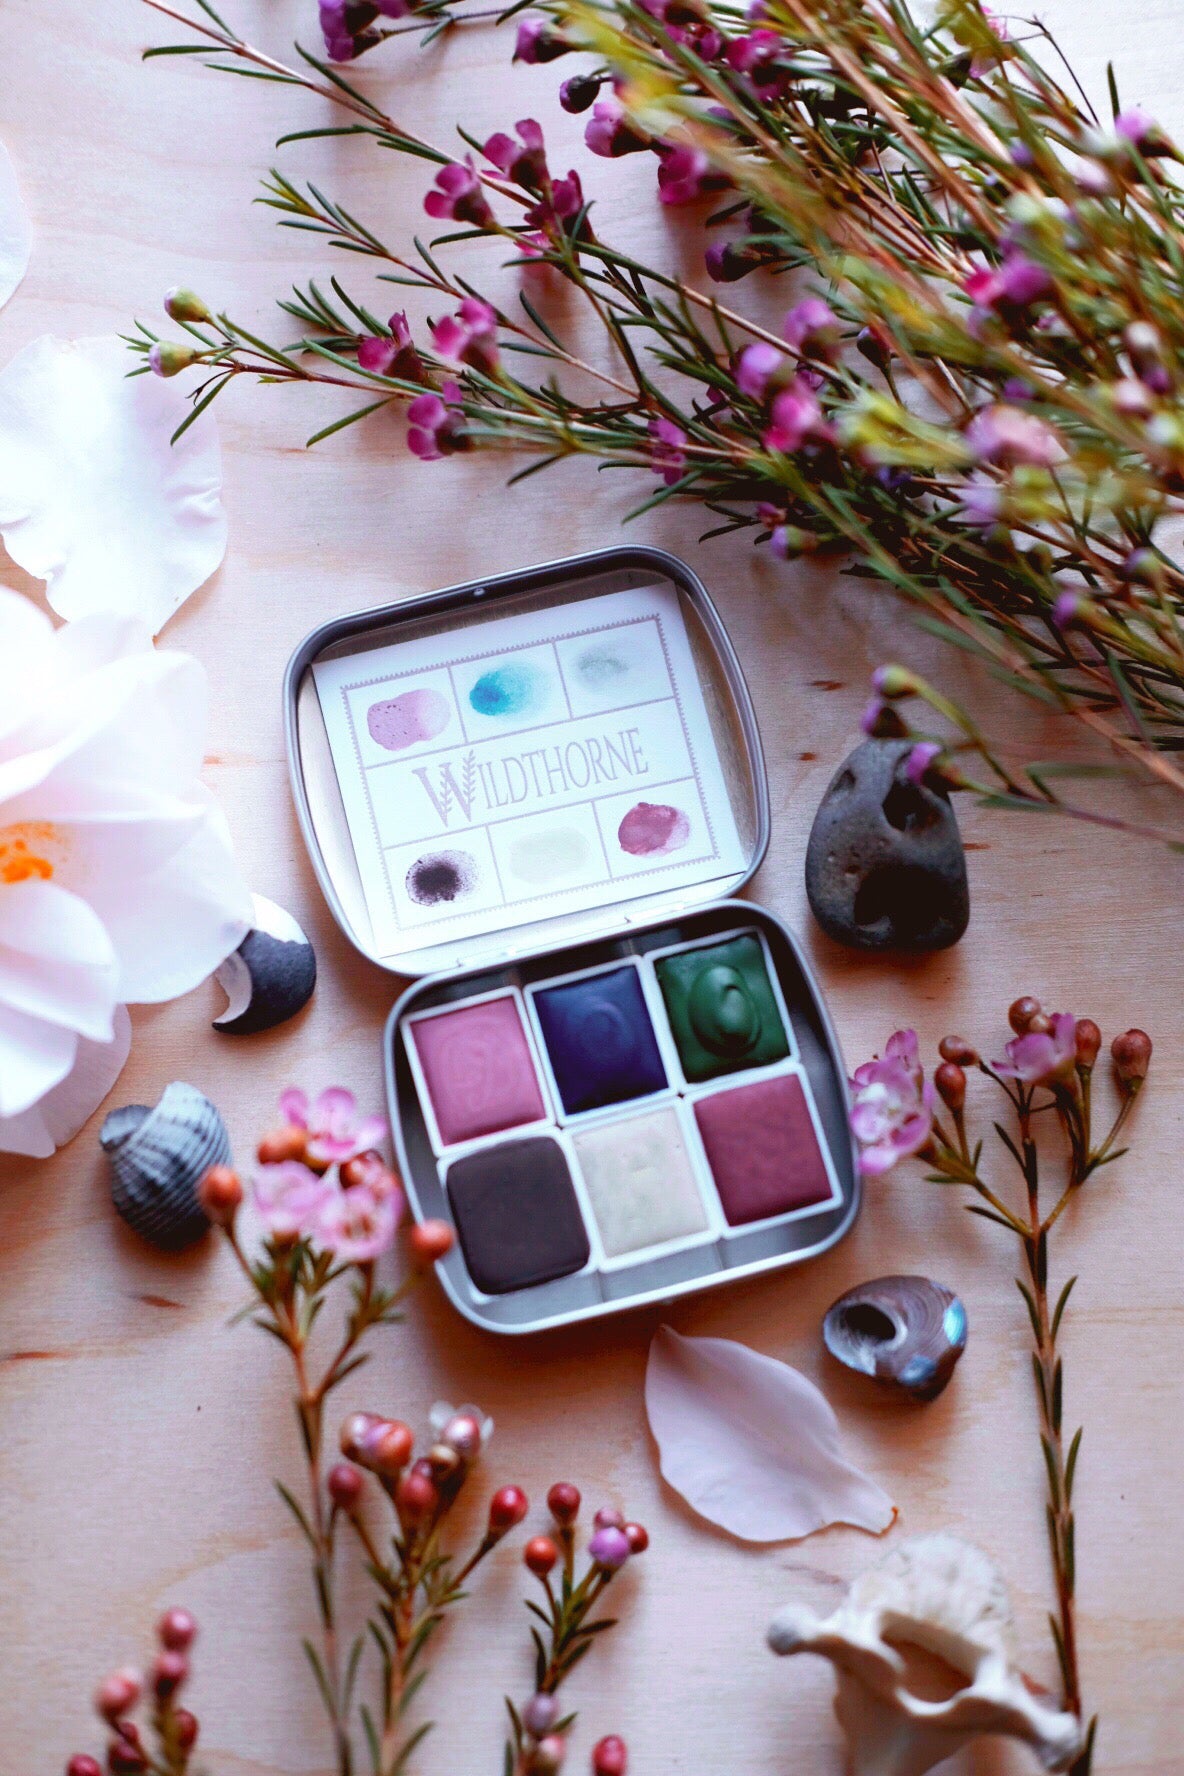 RESERVE for Julia + Seashell Floret - Limited edition Gemstone Mineral watercolor palette